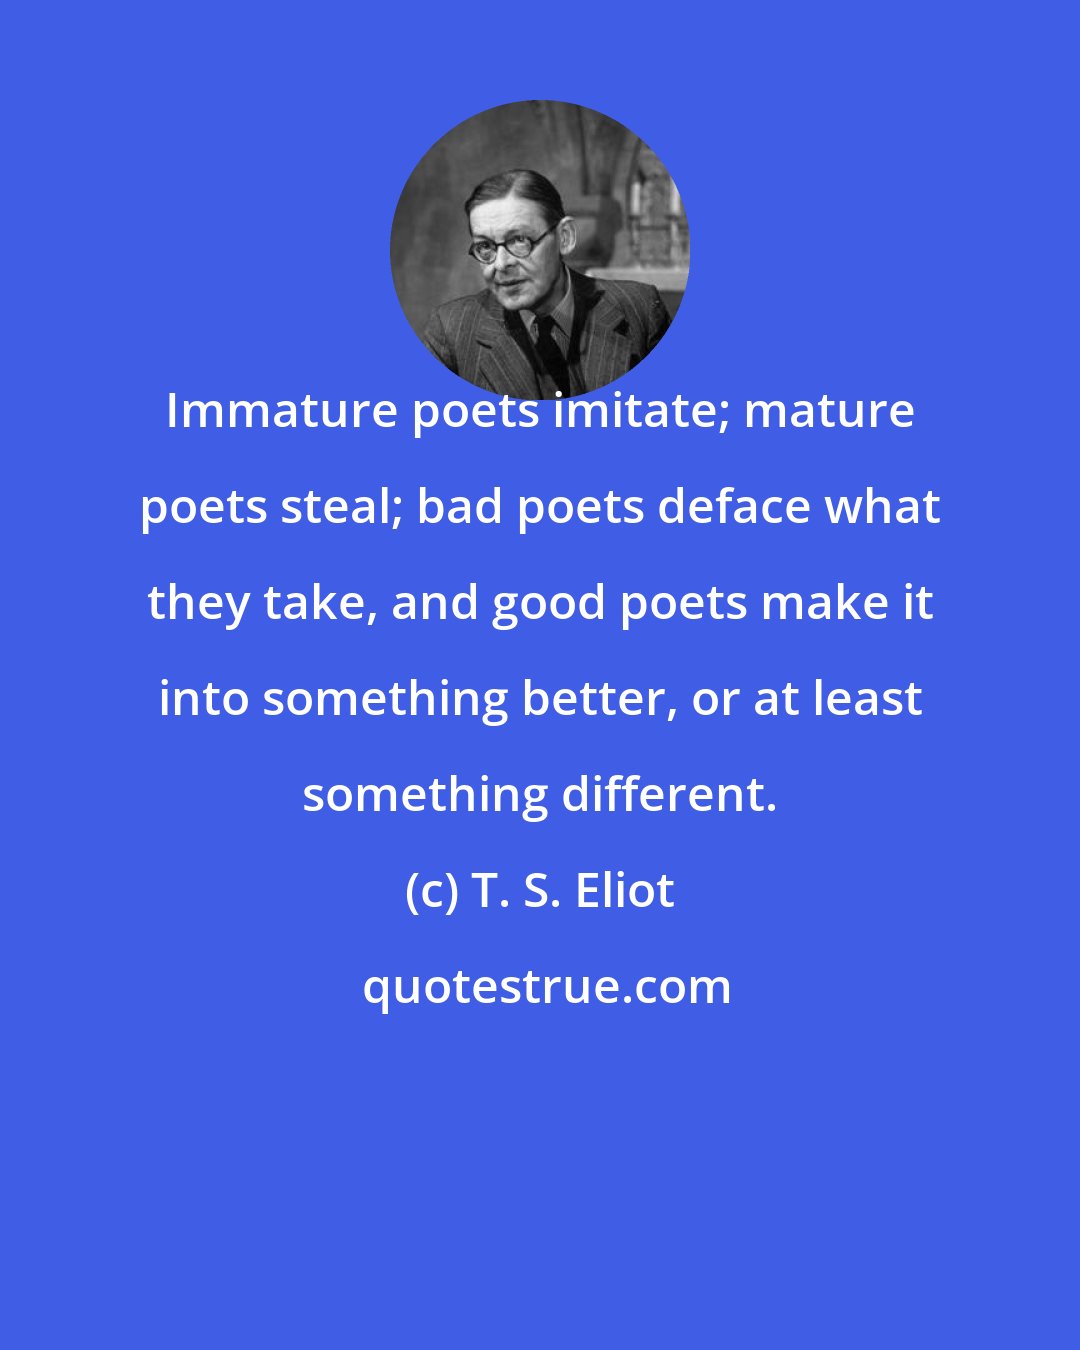 T. S. Eliot: Immature poets imitate; mature poets steal; bad poets deface what they take, and good poets make it into something better, or at least something different.